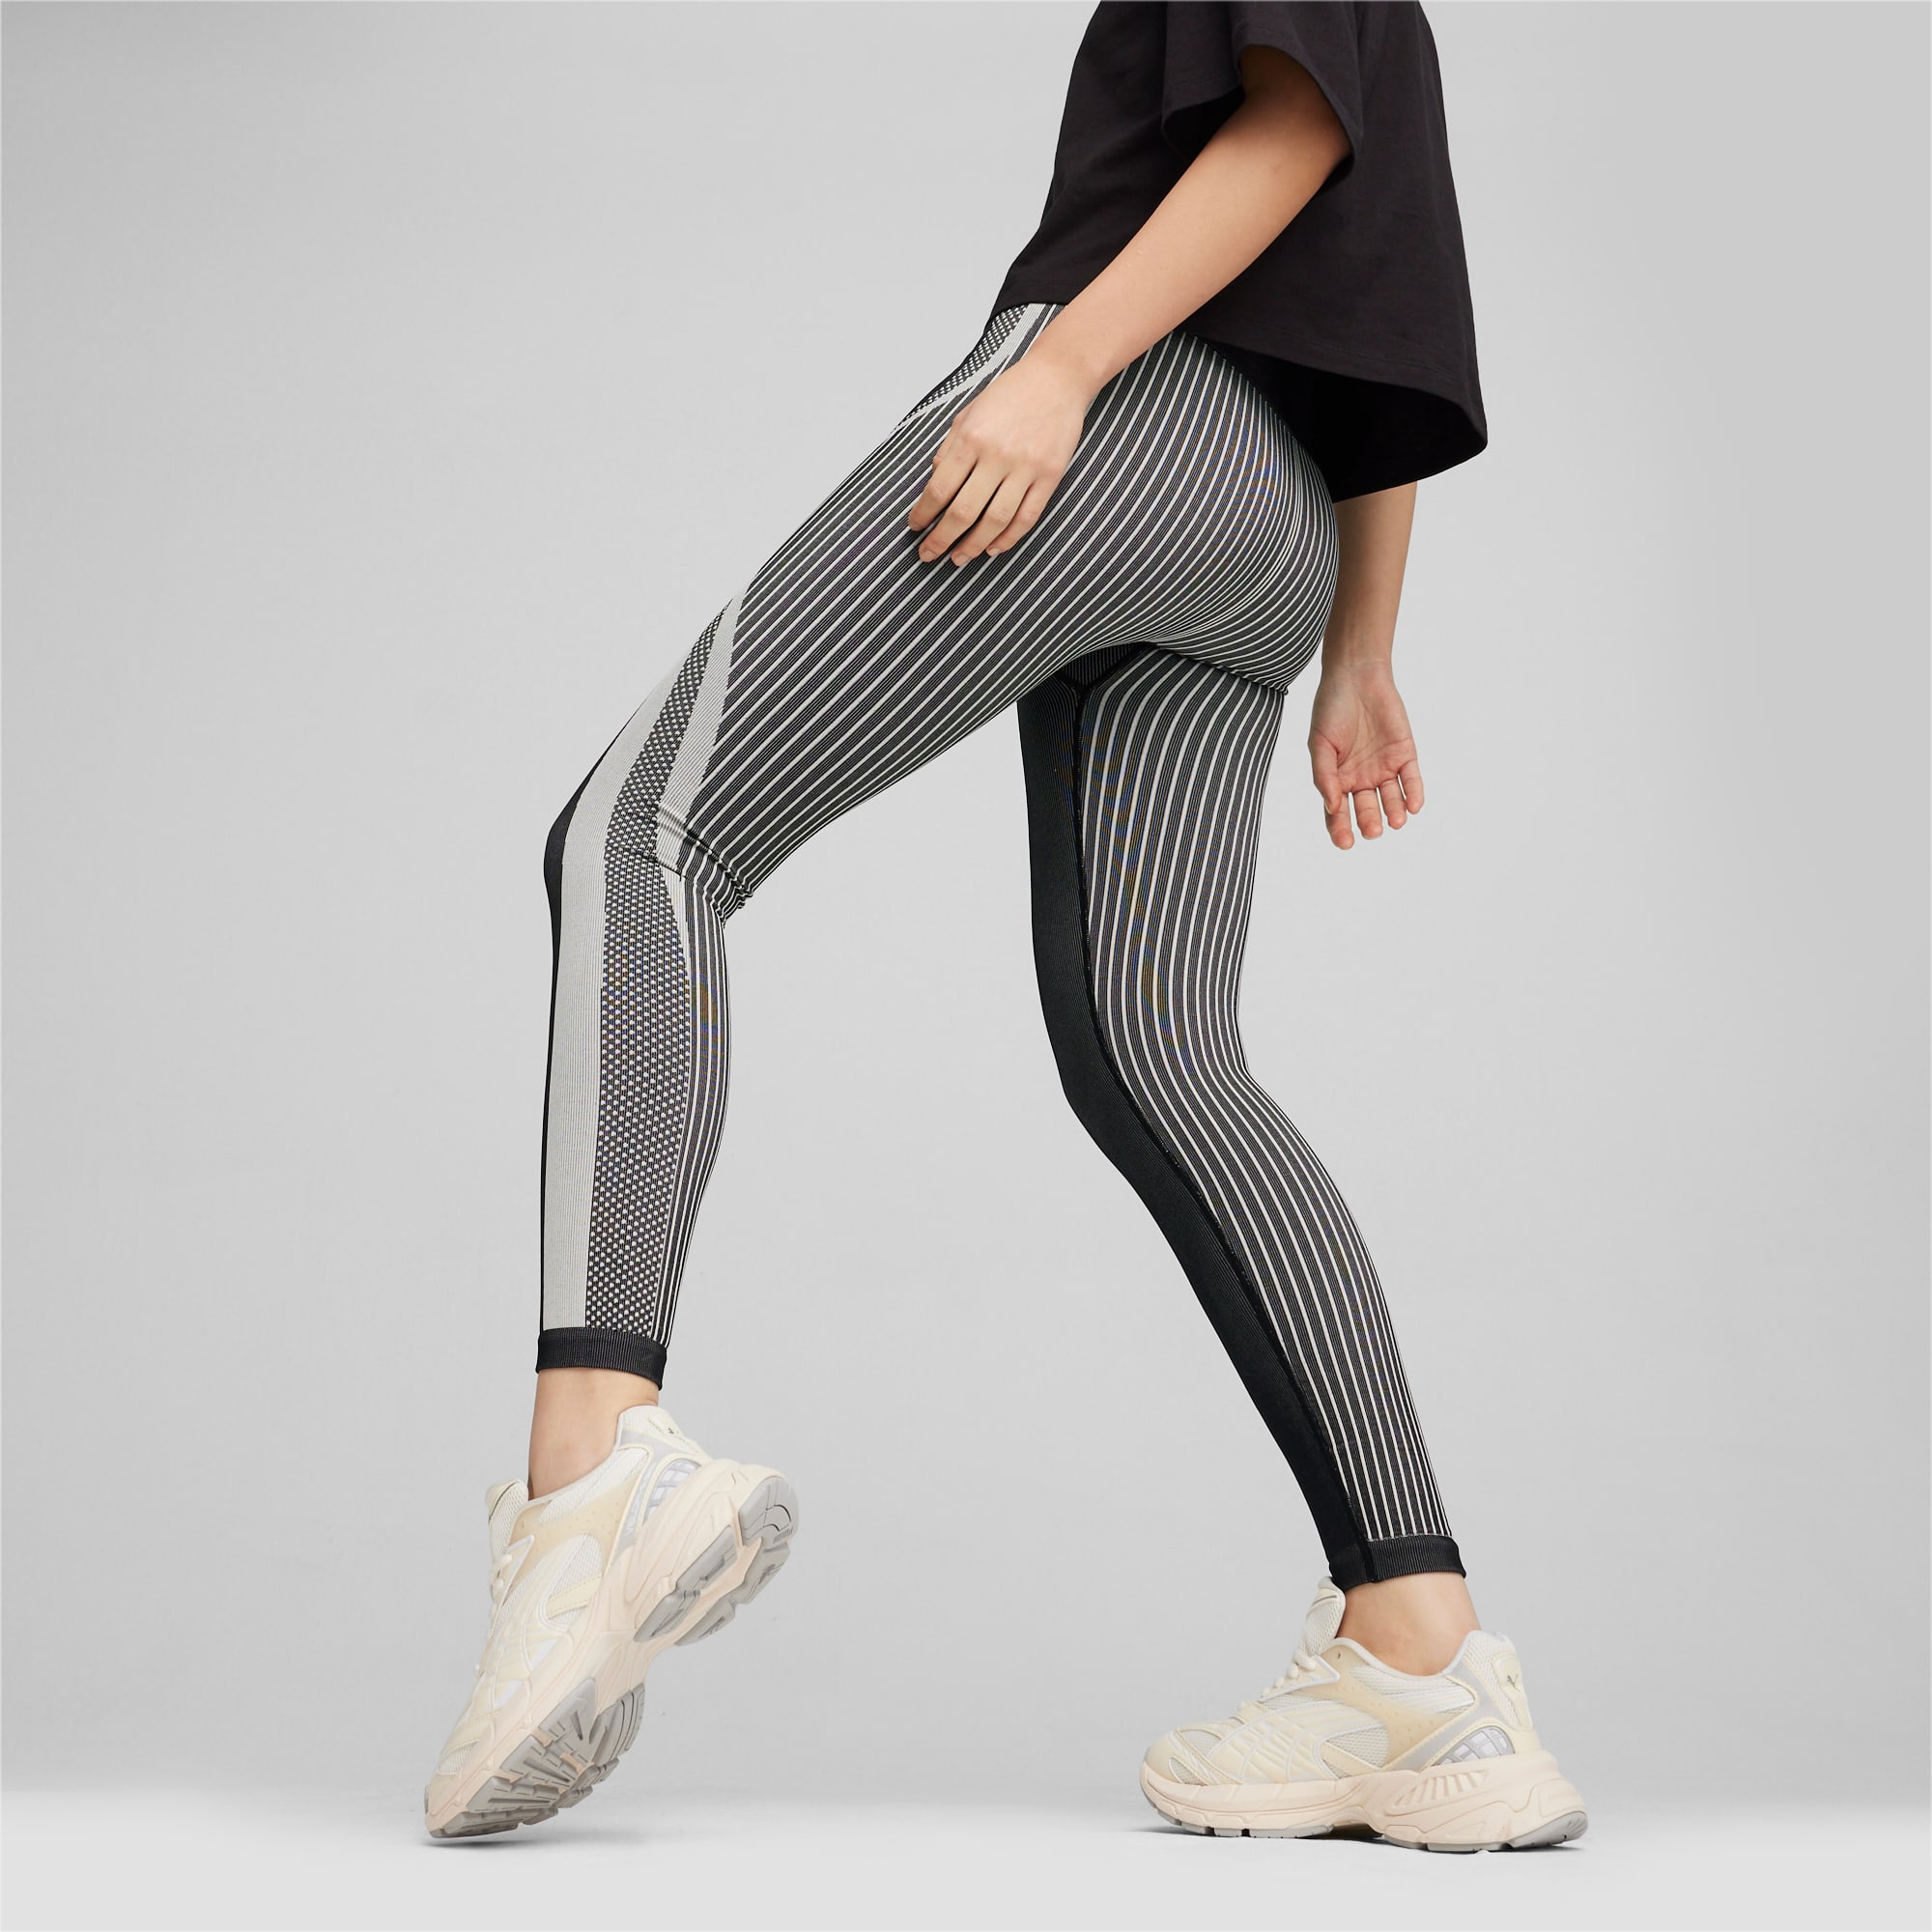 Puma Womens Clothing, Shoes & Sportswear Accessories – INSPORT